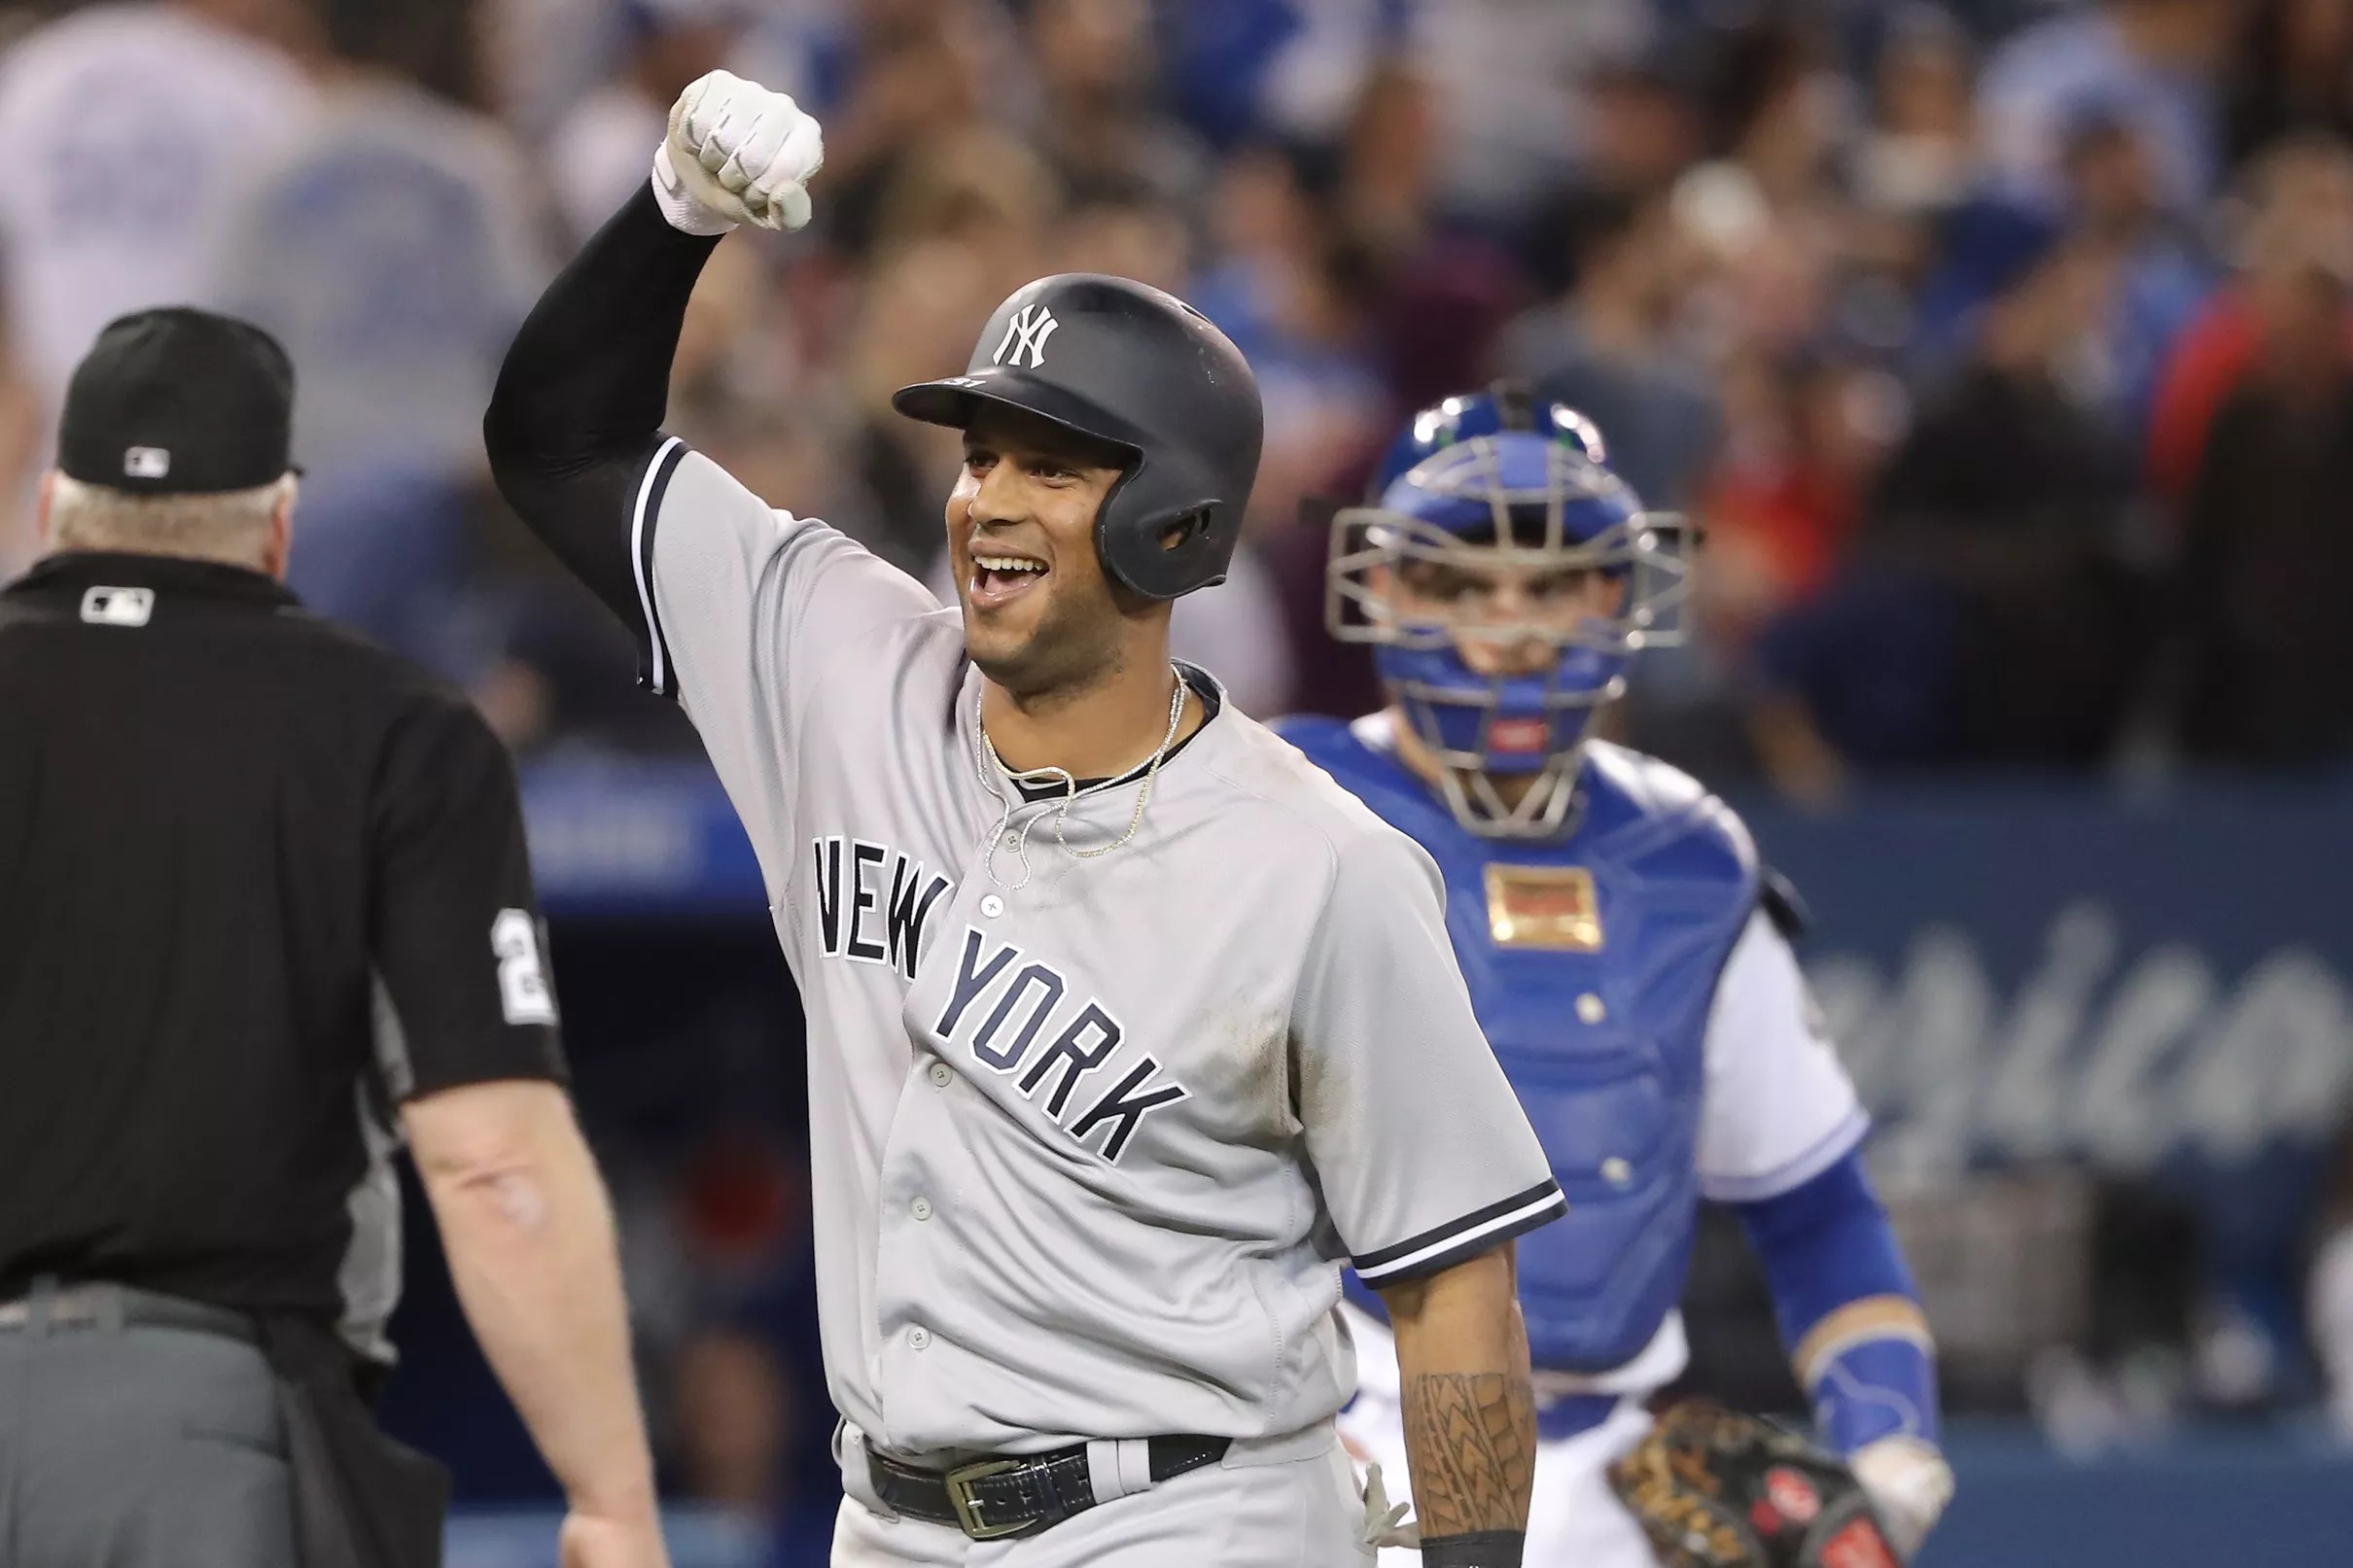 The Yankees are fortunate to have Aaron Hicks